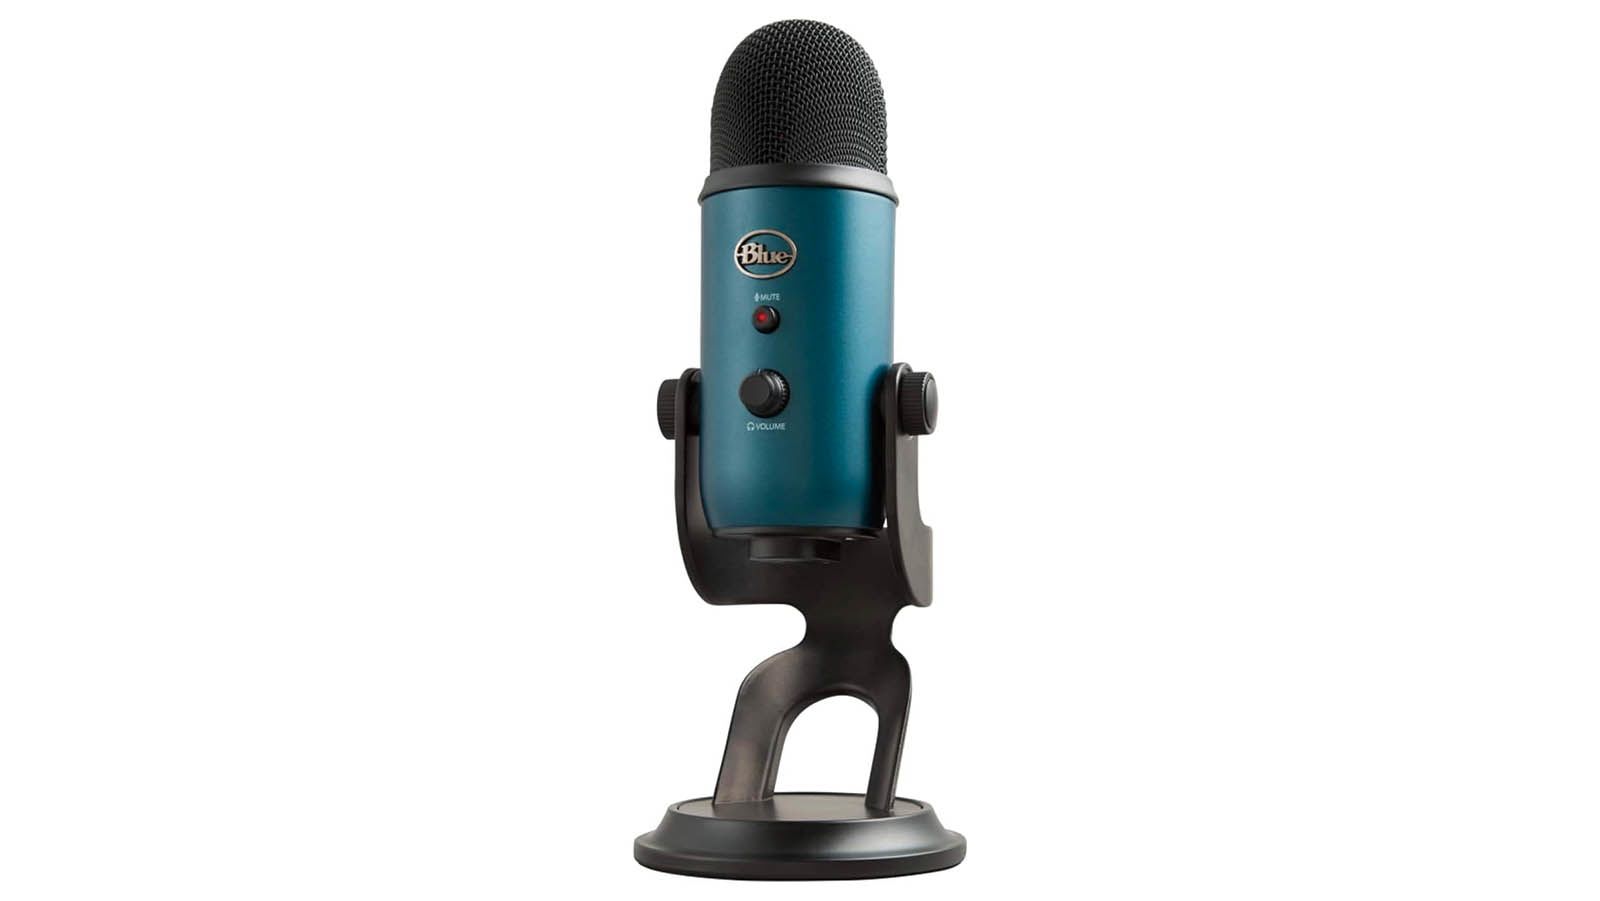 Blue Yeti mics are up to 35 percent off for Black Friday